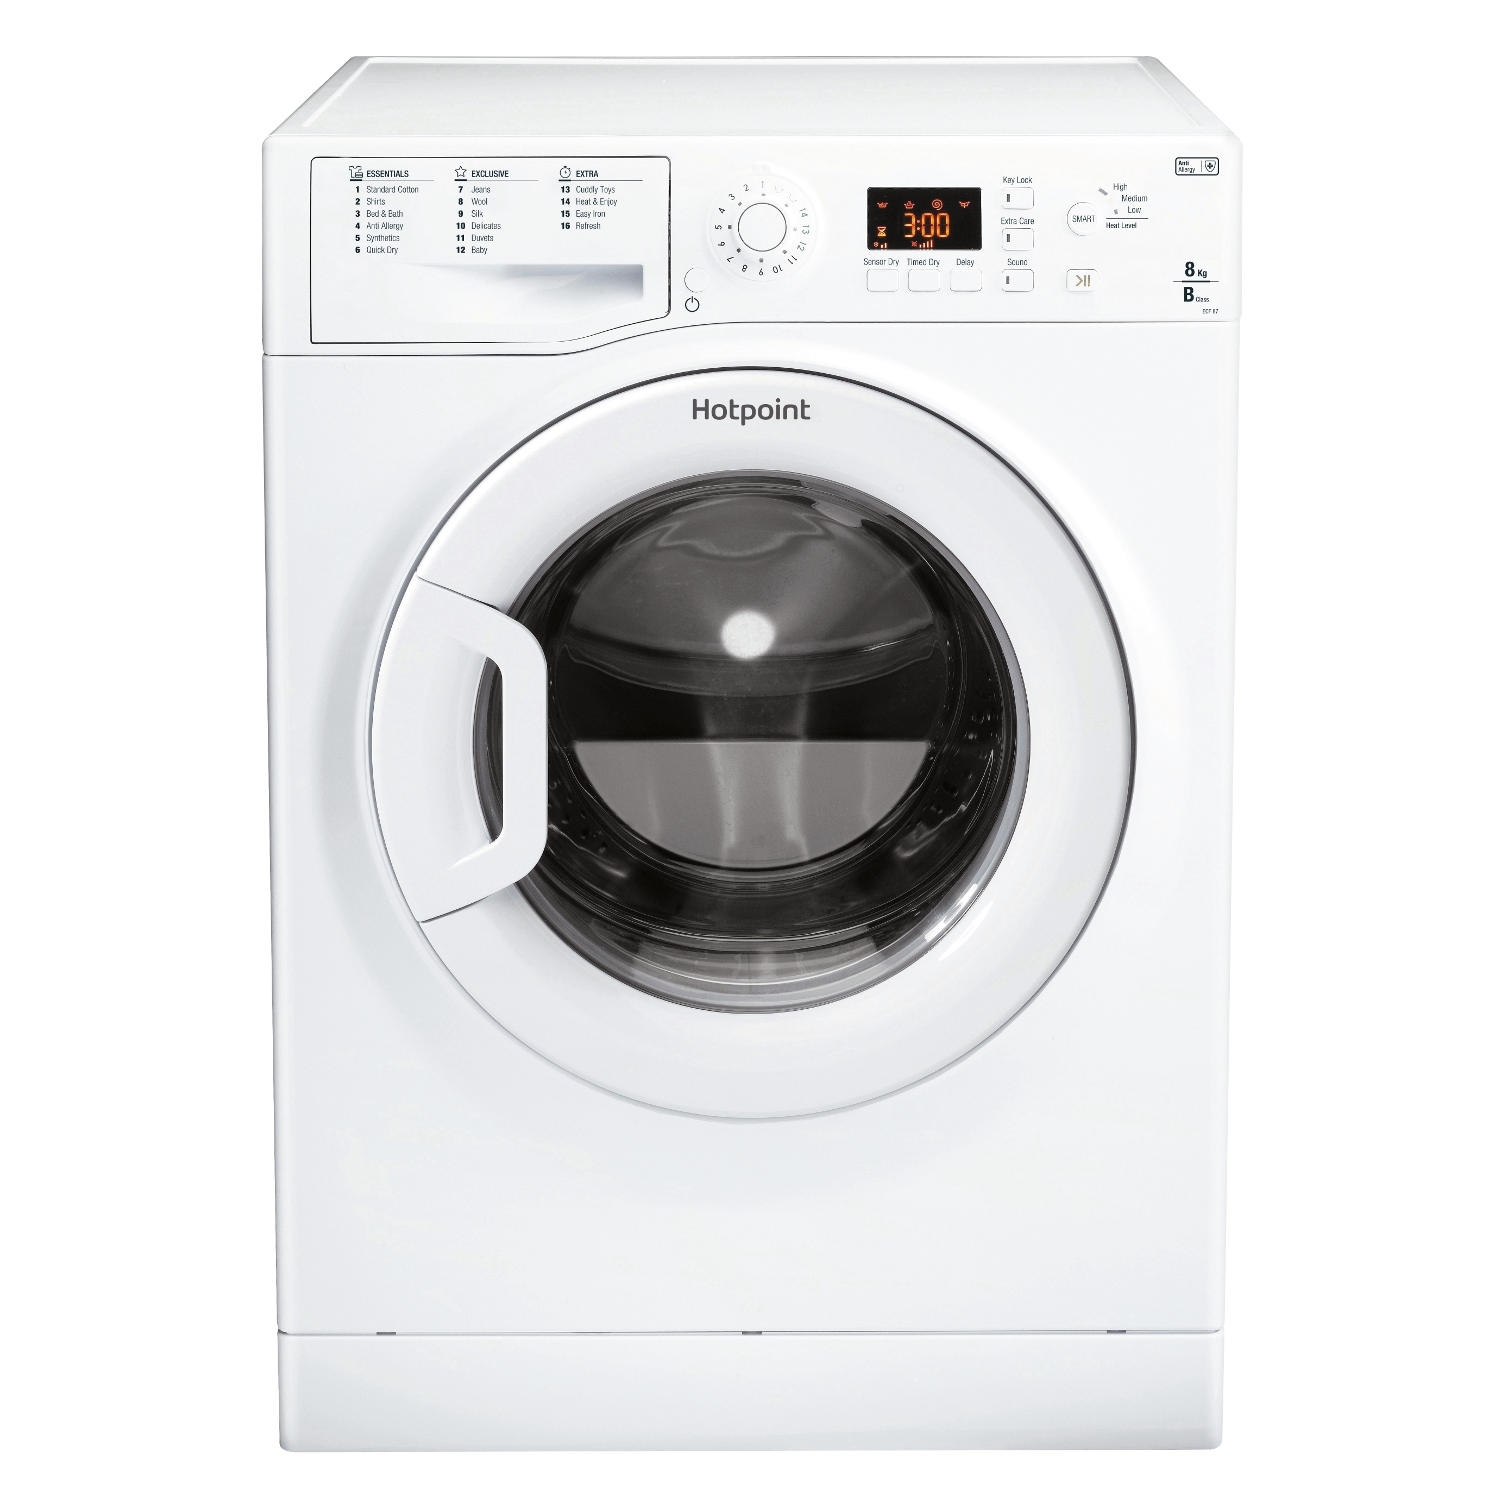 Hotpoint 8kg Condenser Tumble Dryer - White - B Rated - 0